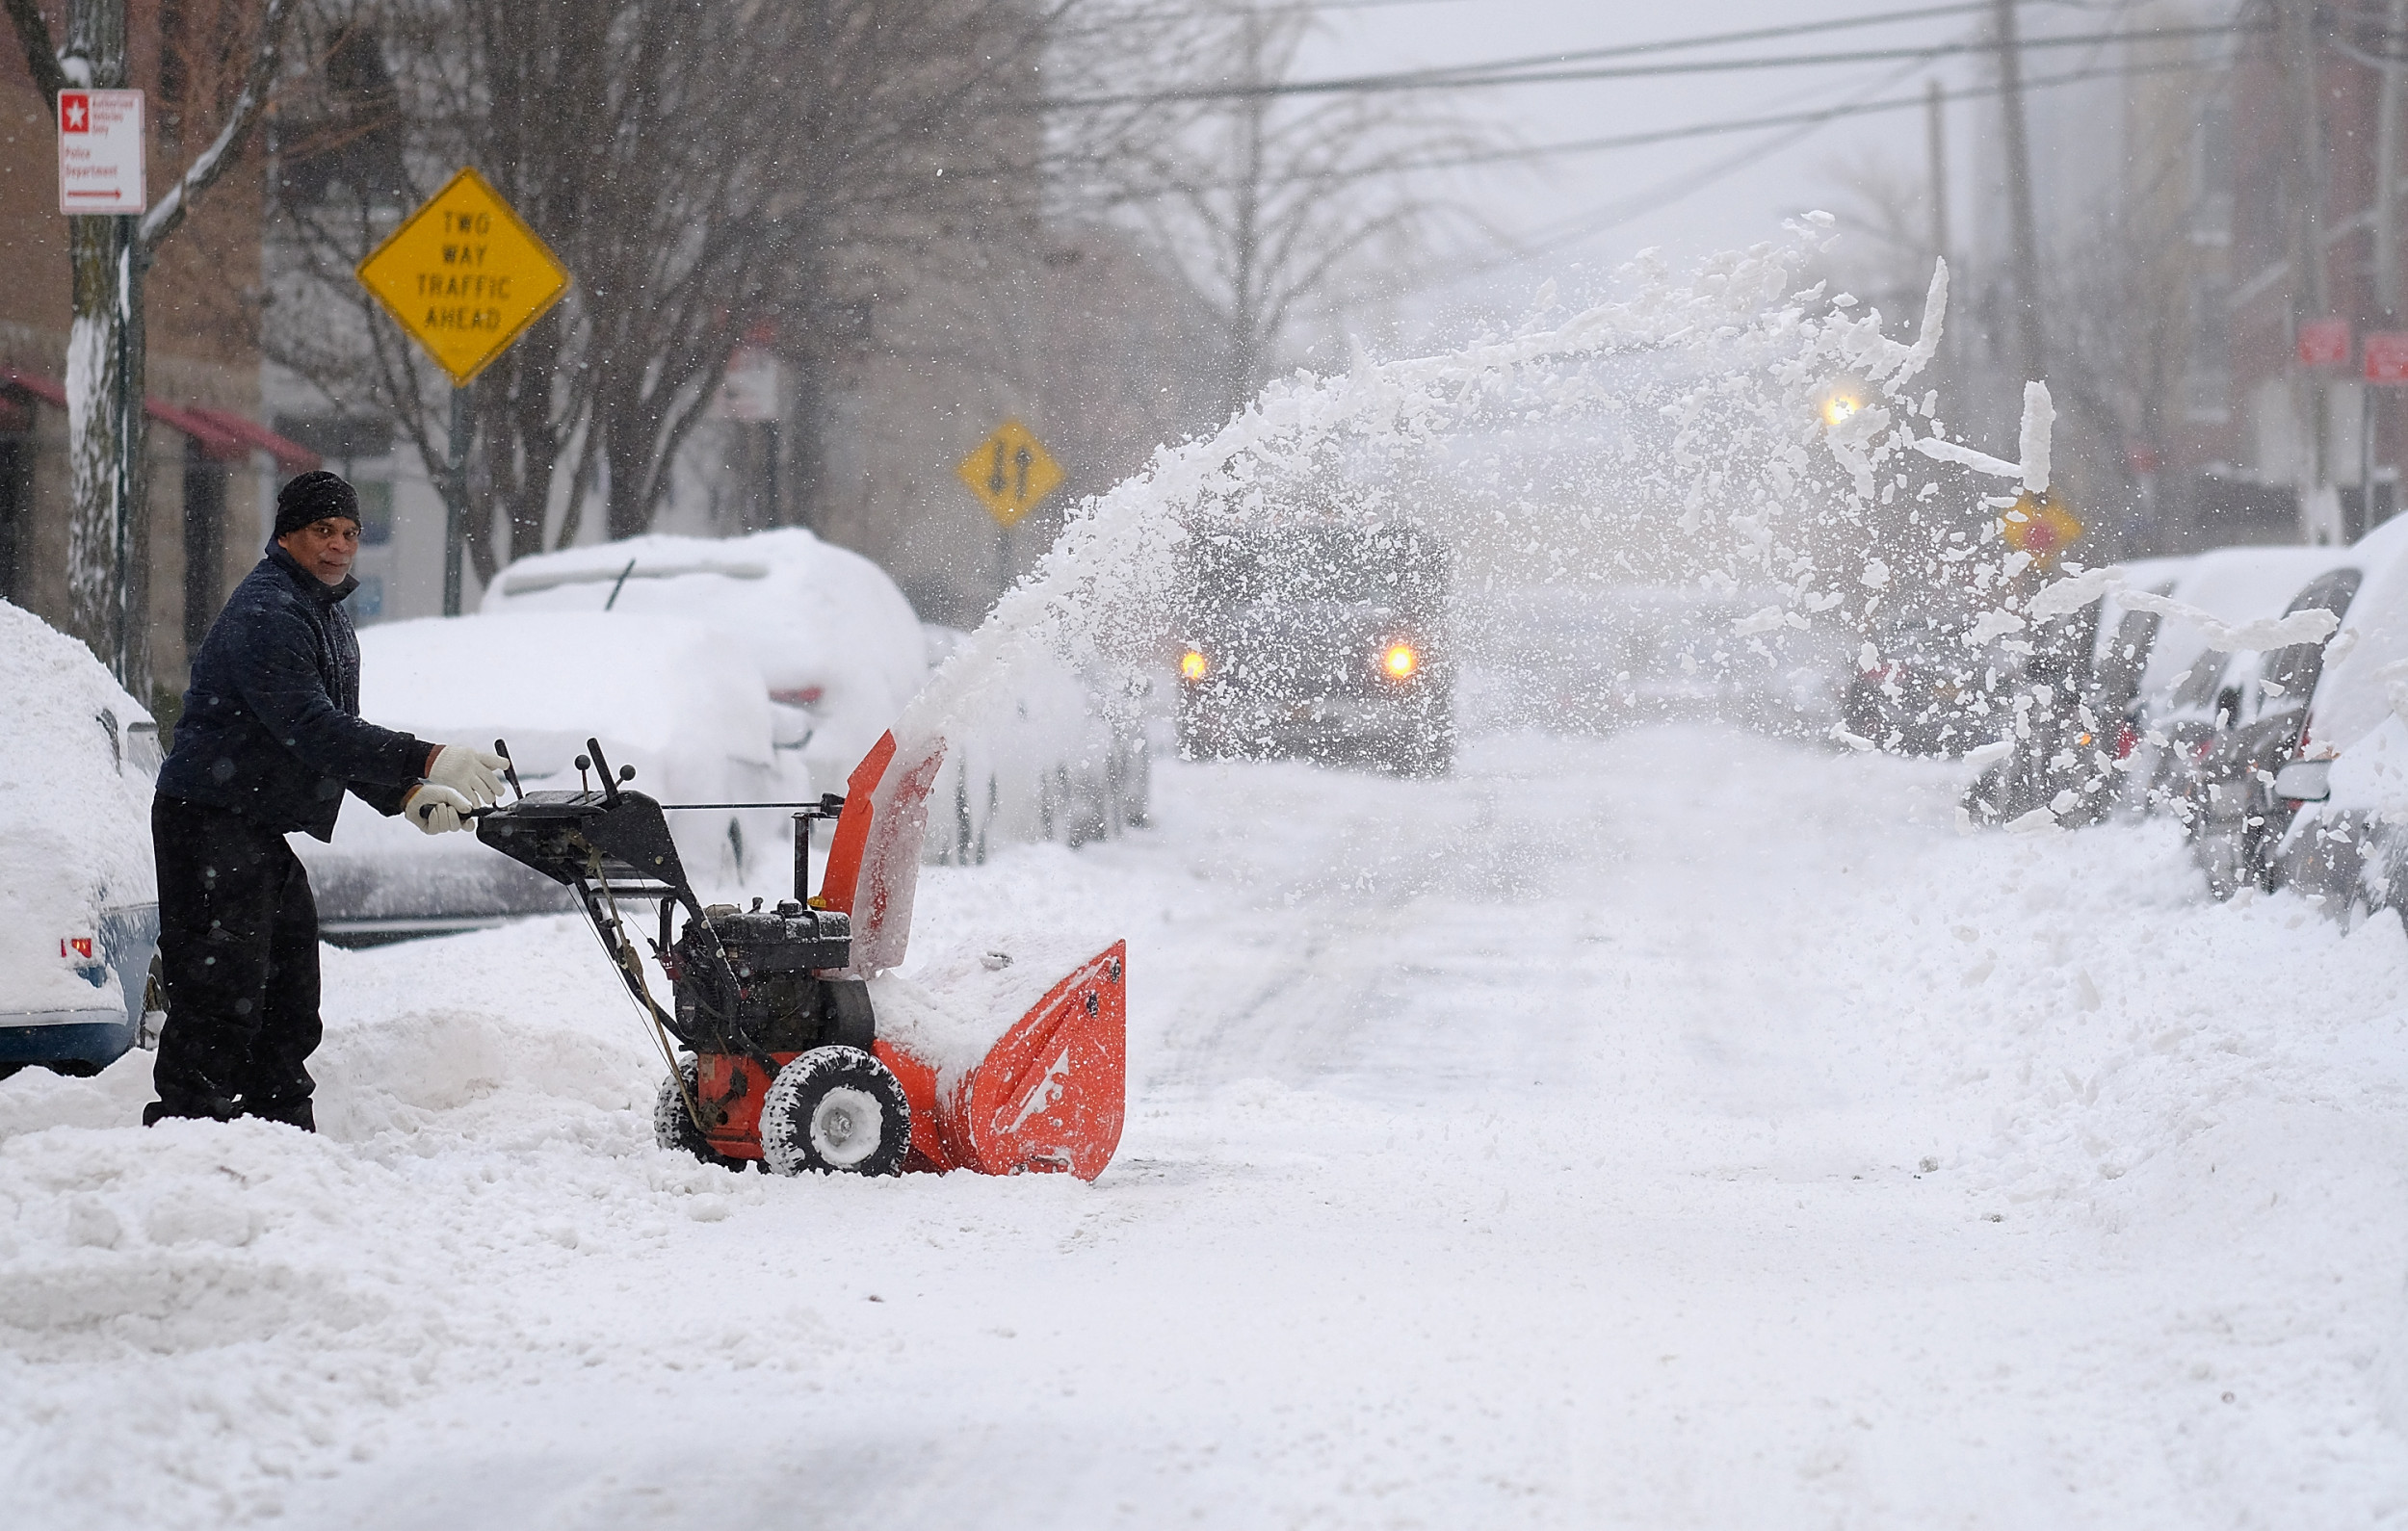 winter-storm-update-thousands-of-power-outages-flight-delays-across-northeast-with-new-storm